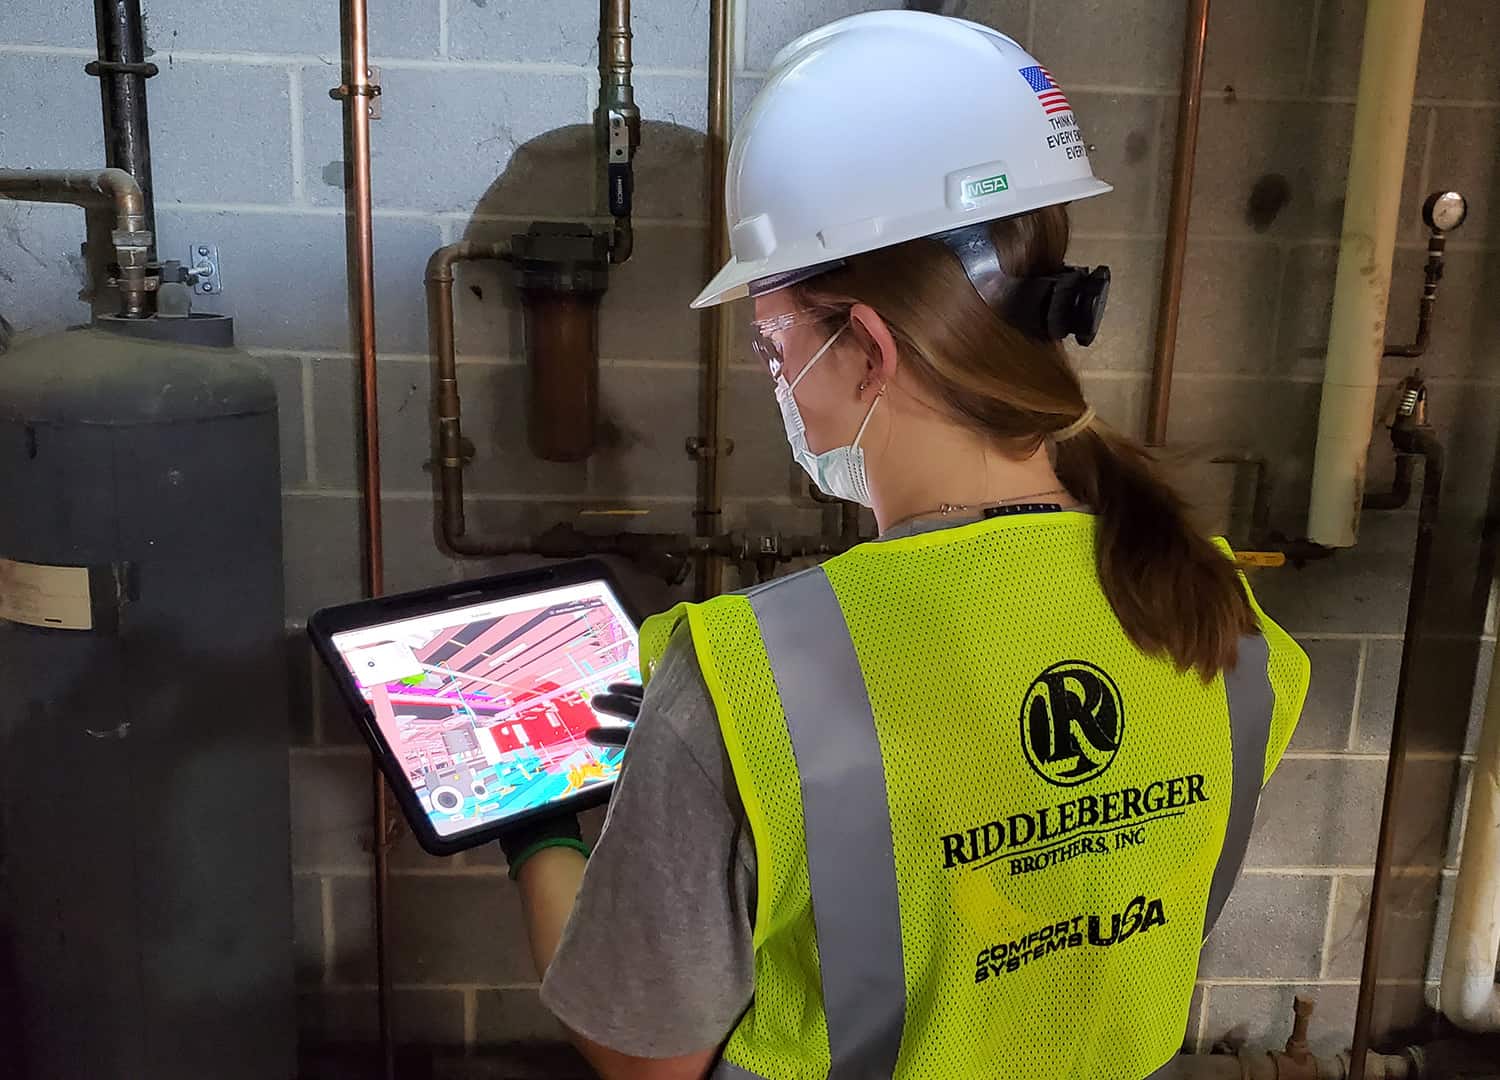 An RBI technician reviewing a visual intelligence image on a tablet while inspecting equipment.